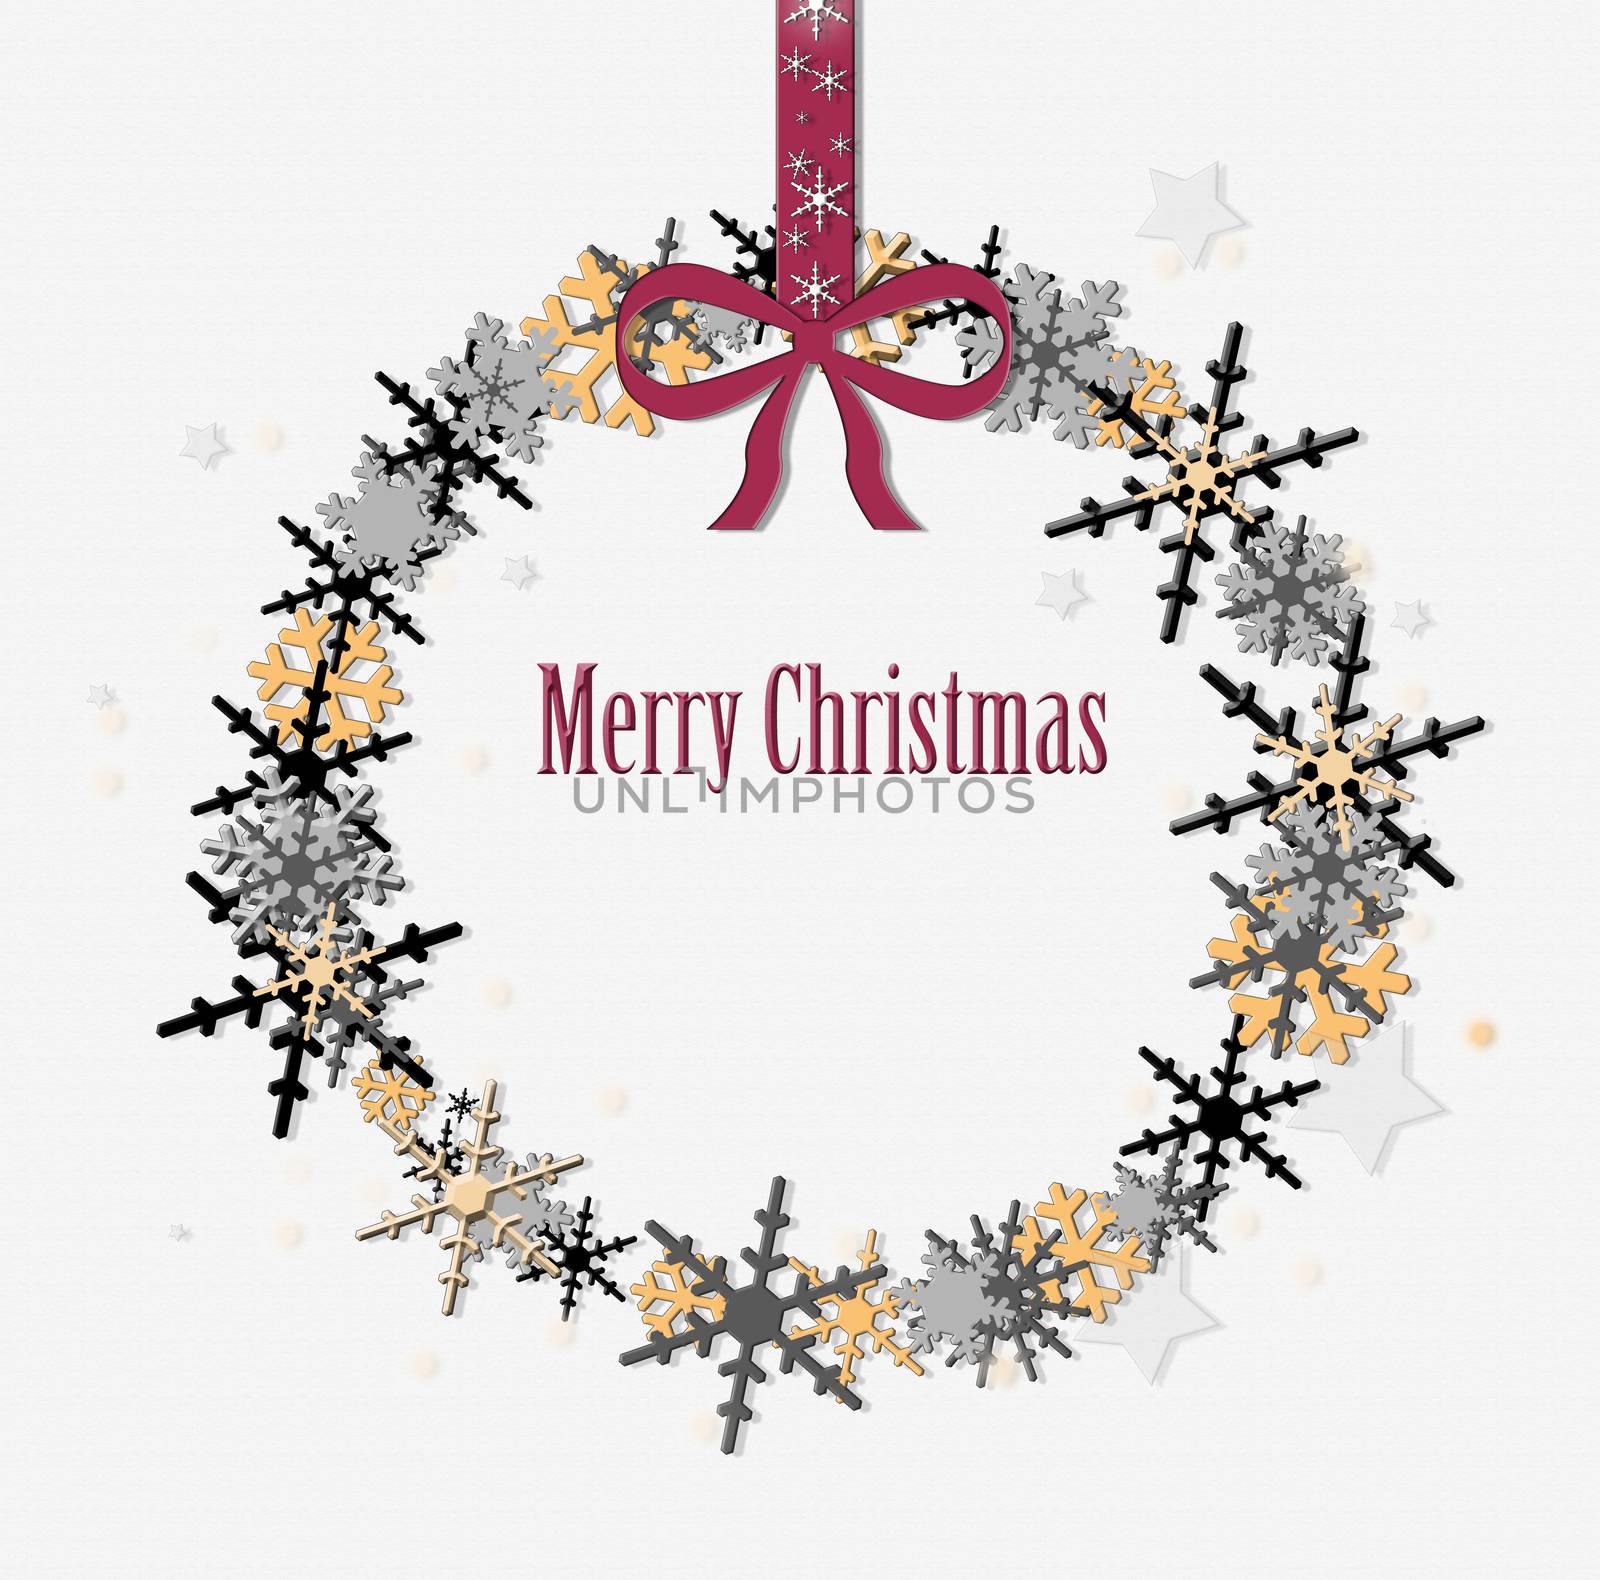 Merry Christmas text with golden, black and silver snowflakes in wreath shape. Merry Christmas luxury greeting card. Illustration